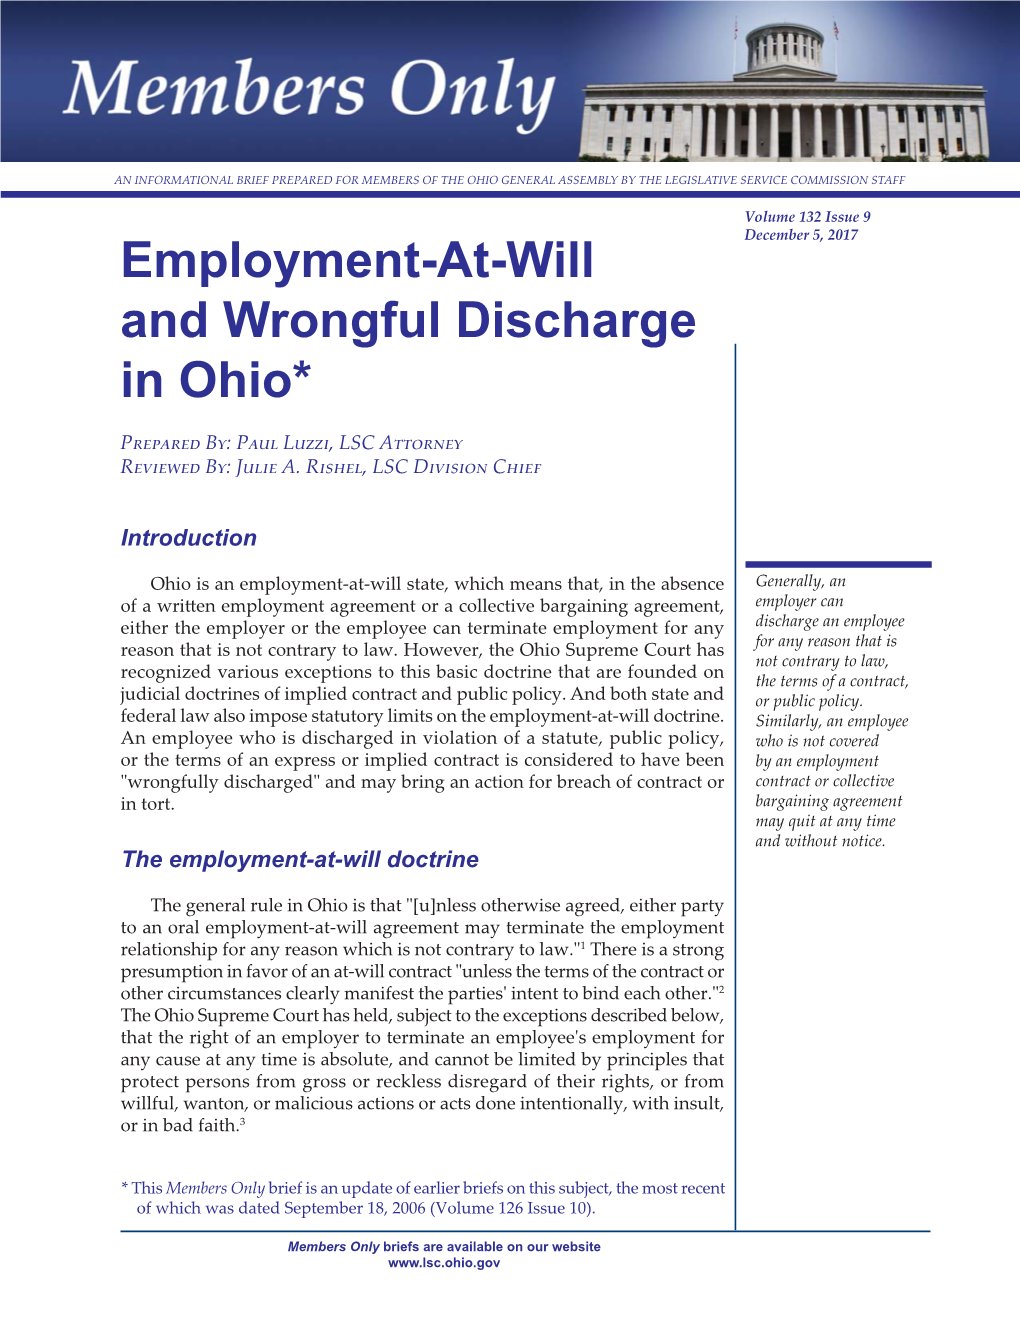 Employment-At-Will and Wrongful Discharge in Ohio*